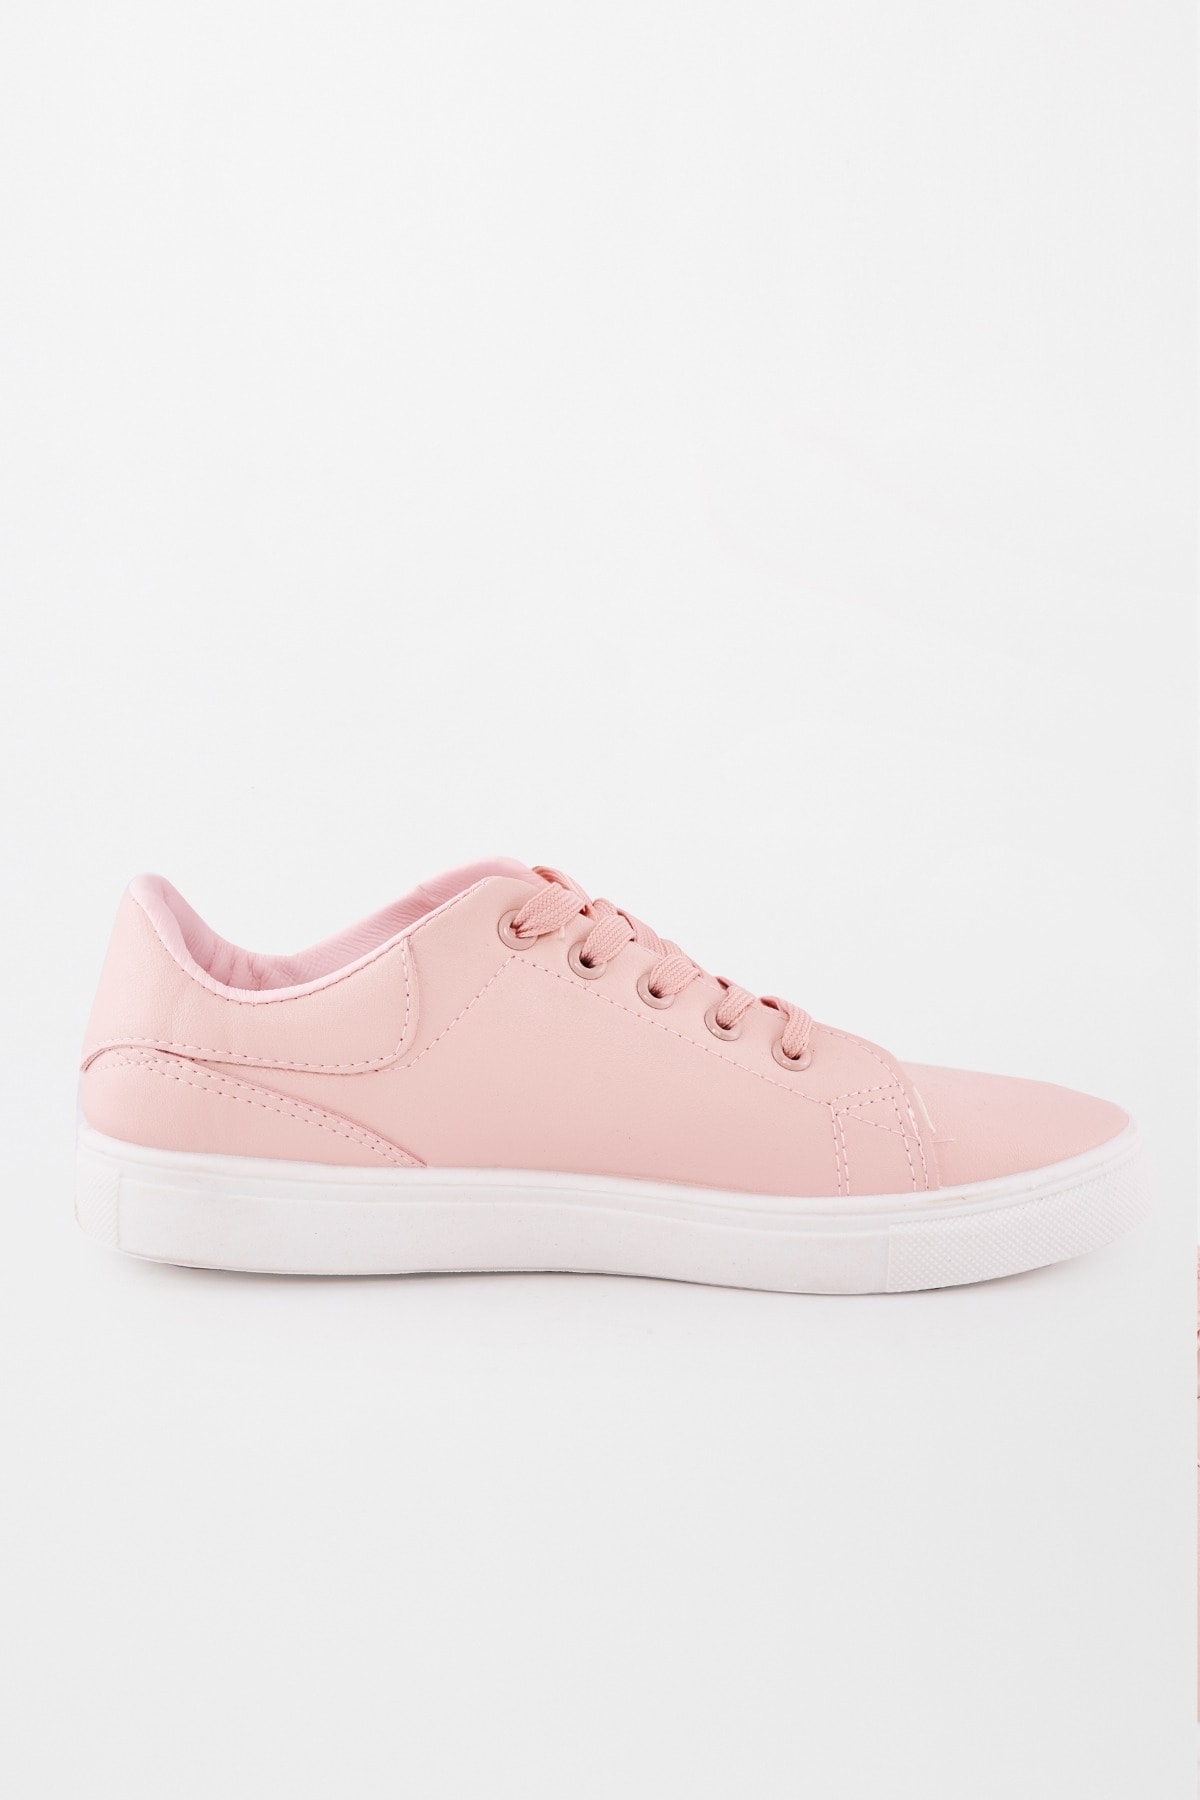 AND | Pink Sneakers 0